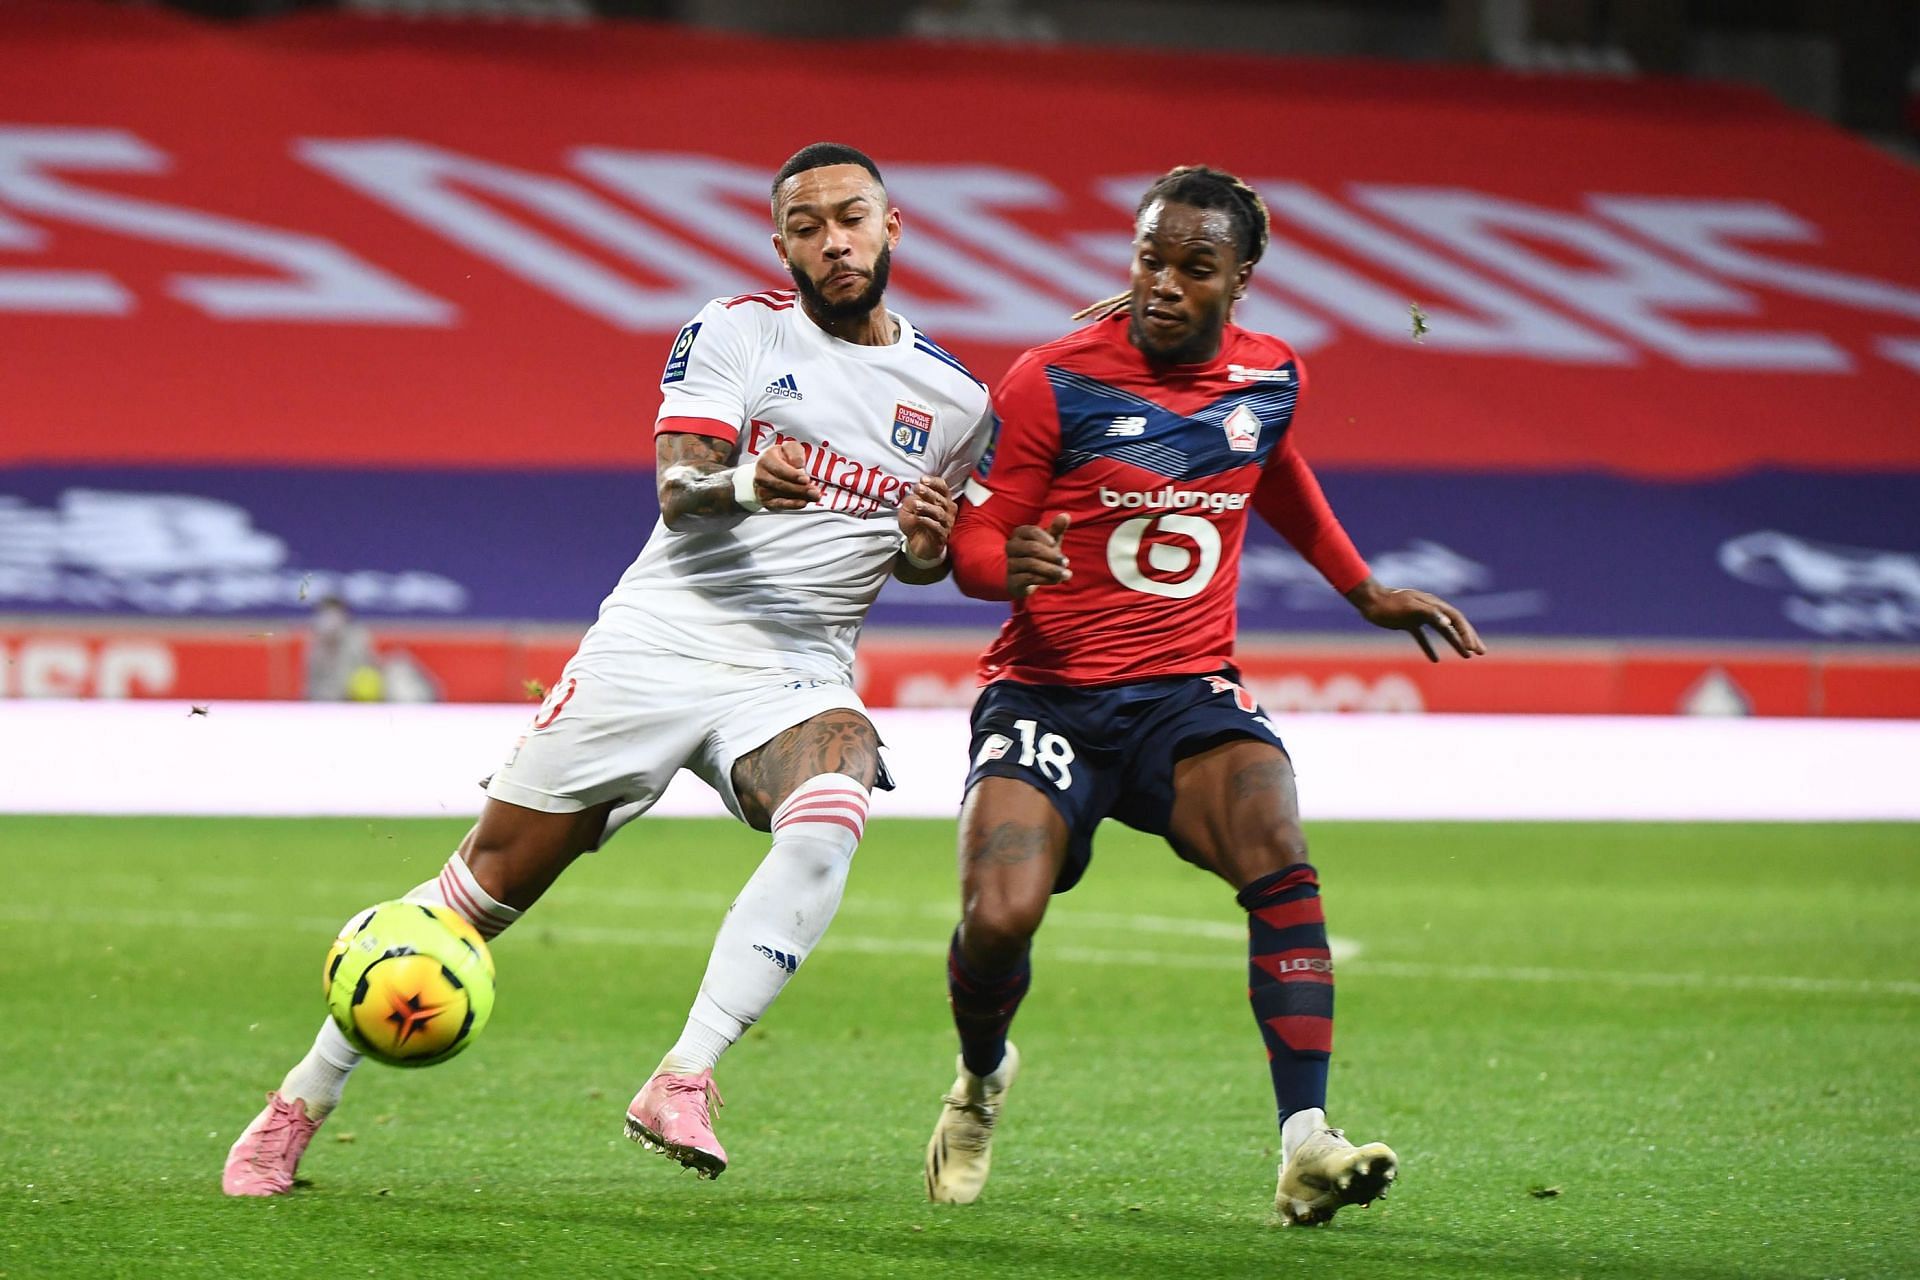 Lyon and Lille will square off in Ligue 1 on Sunday